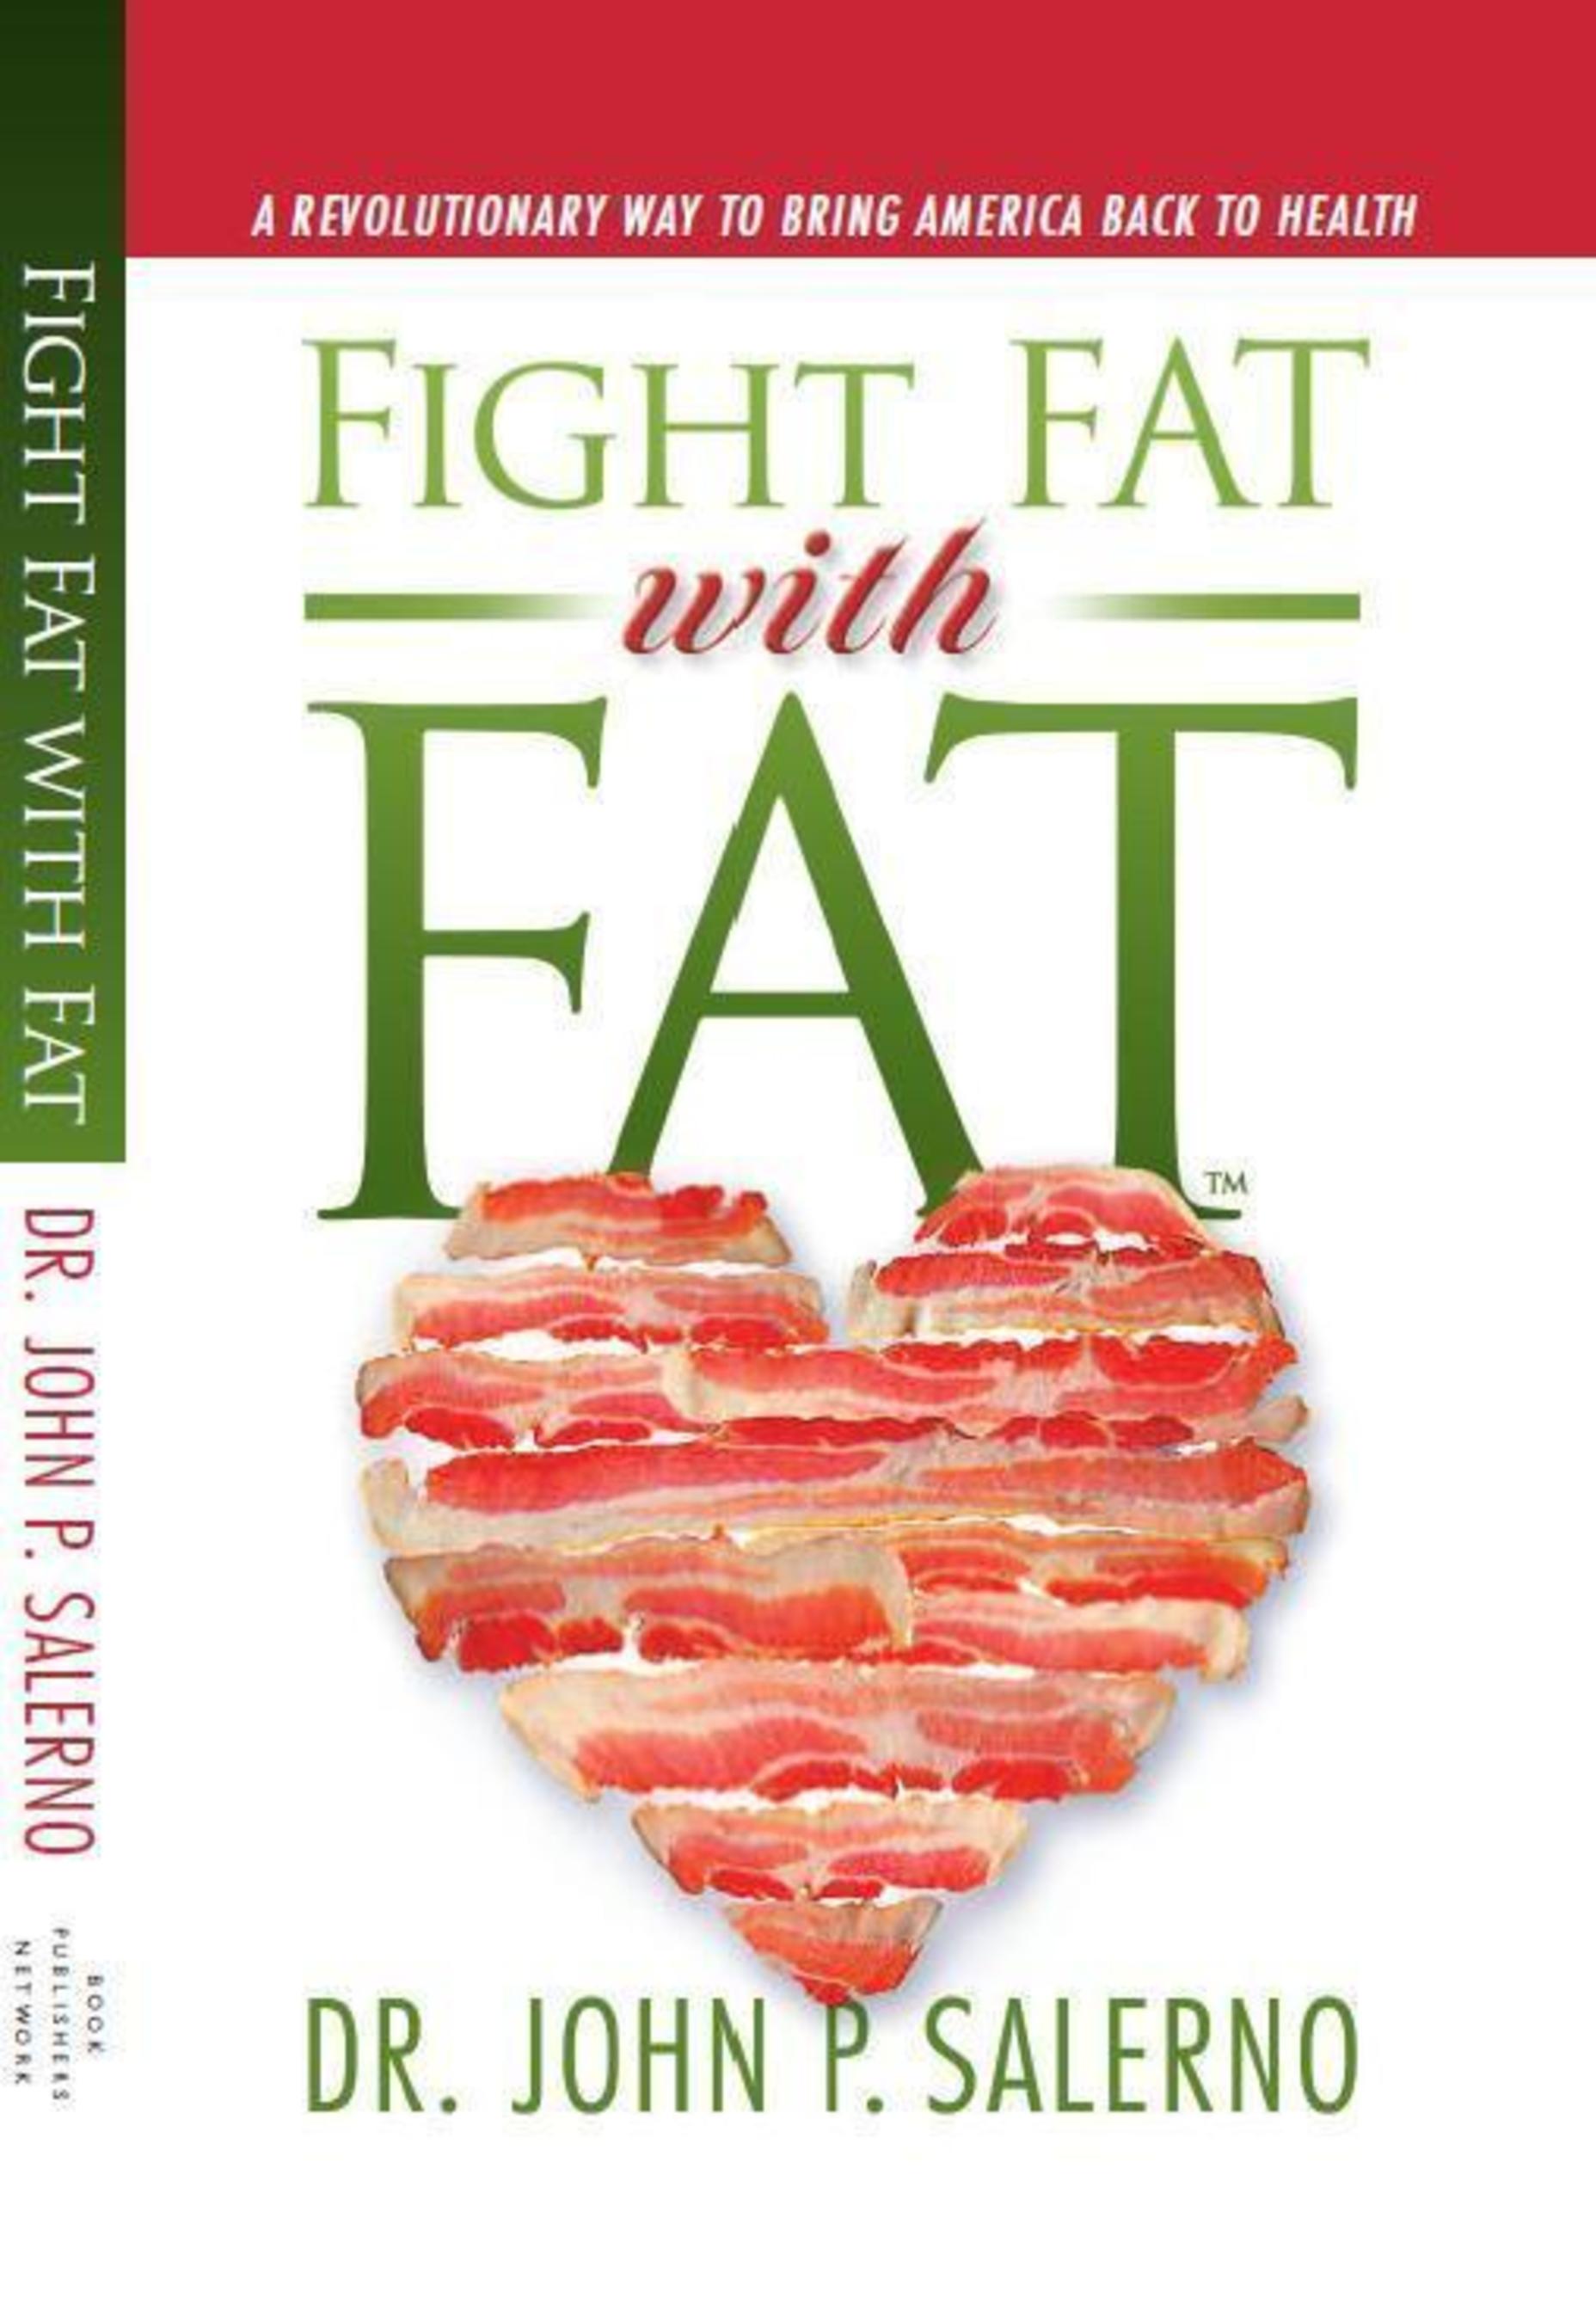 Cover of Dr. John P Salerno's newly released book, Fight Fat with Fat (PRNewsFoto/Dr. John P Salerno)